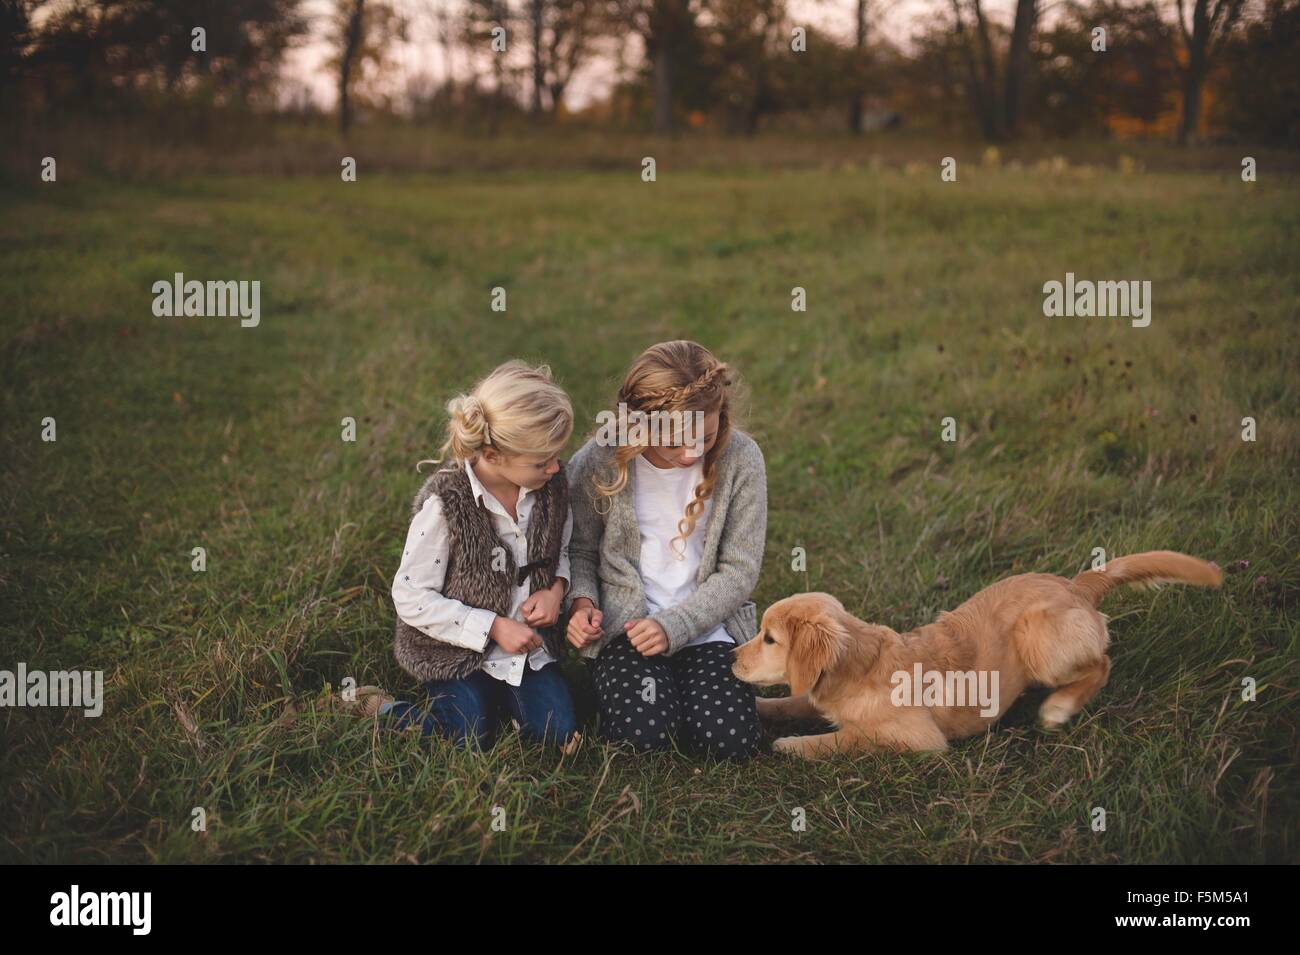 Two young girls sitting in field with pet dog Stock Photo